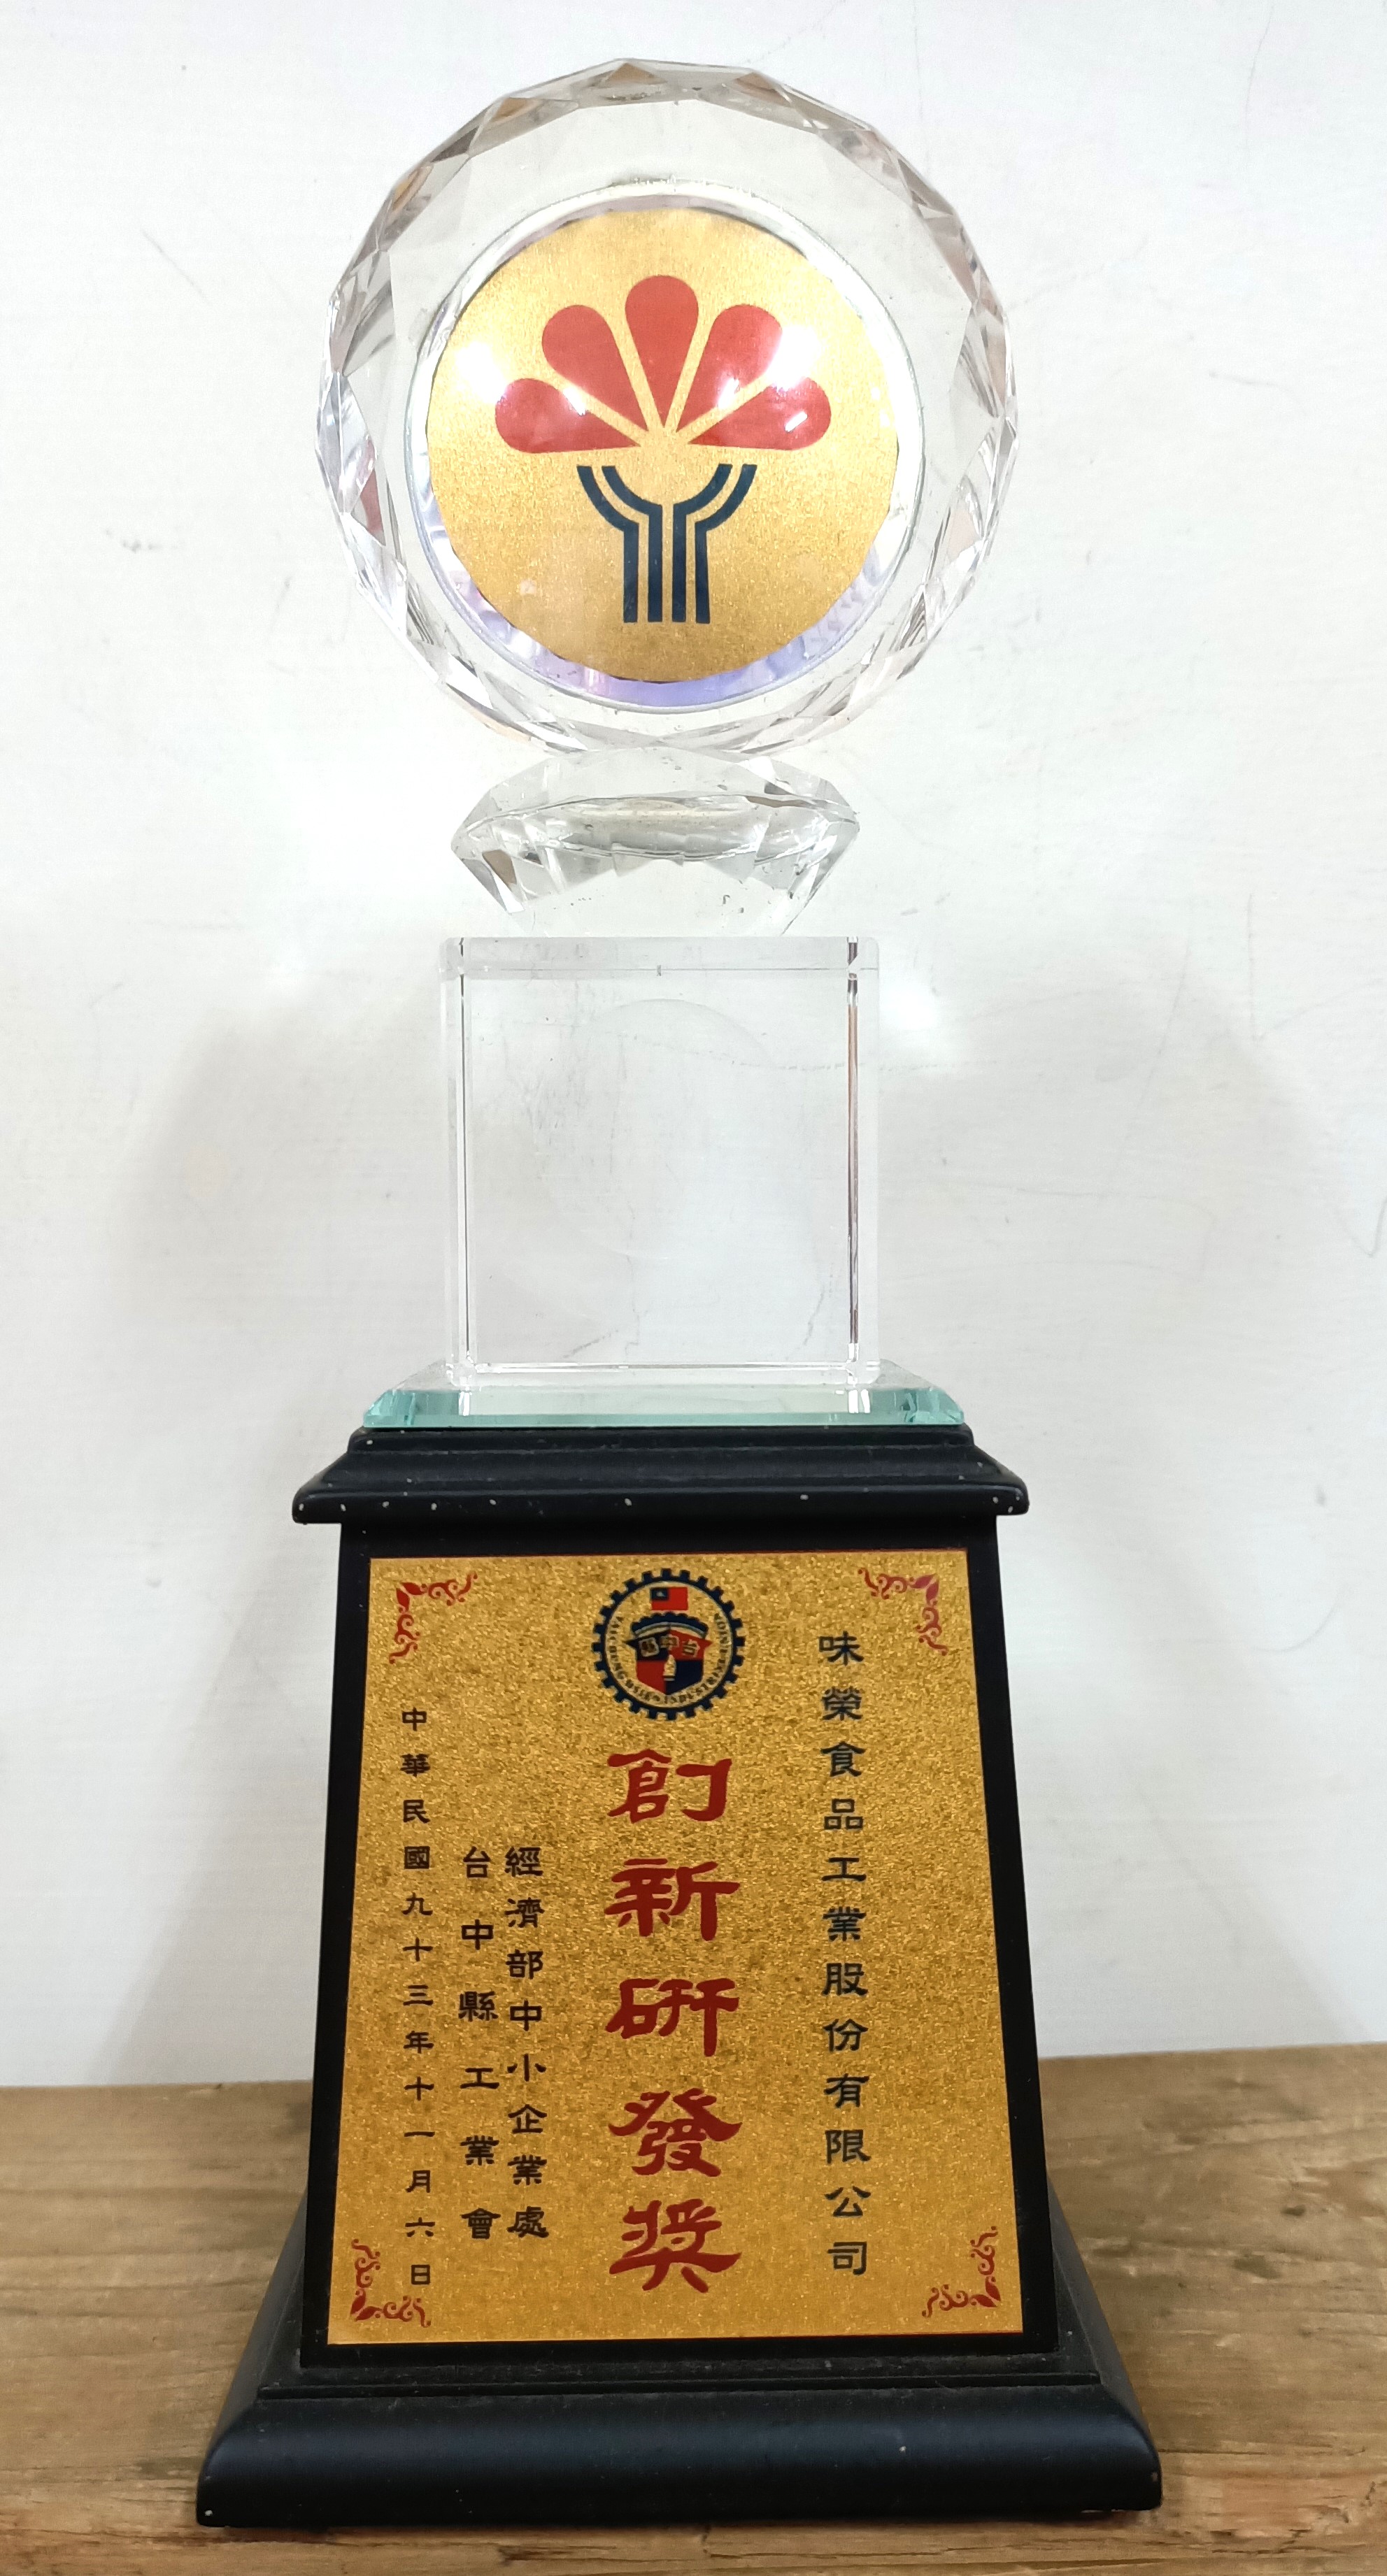 Won the Innovation R&D Award from the Taichung County Industrial Association of the Ministry of Economic Affairs' Small and Medium Enterprises Division